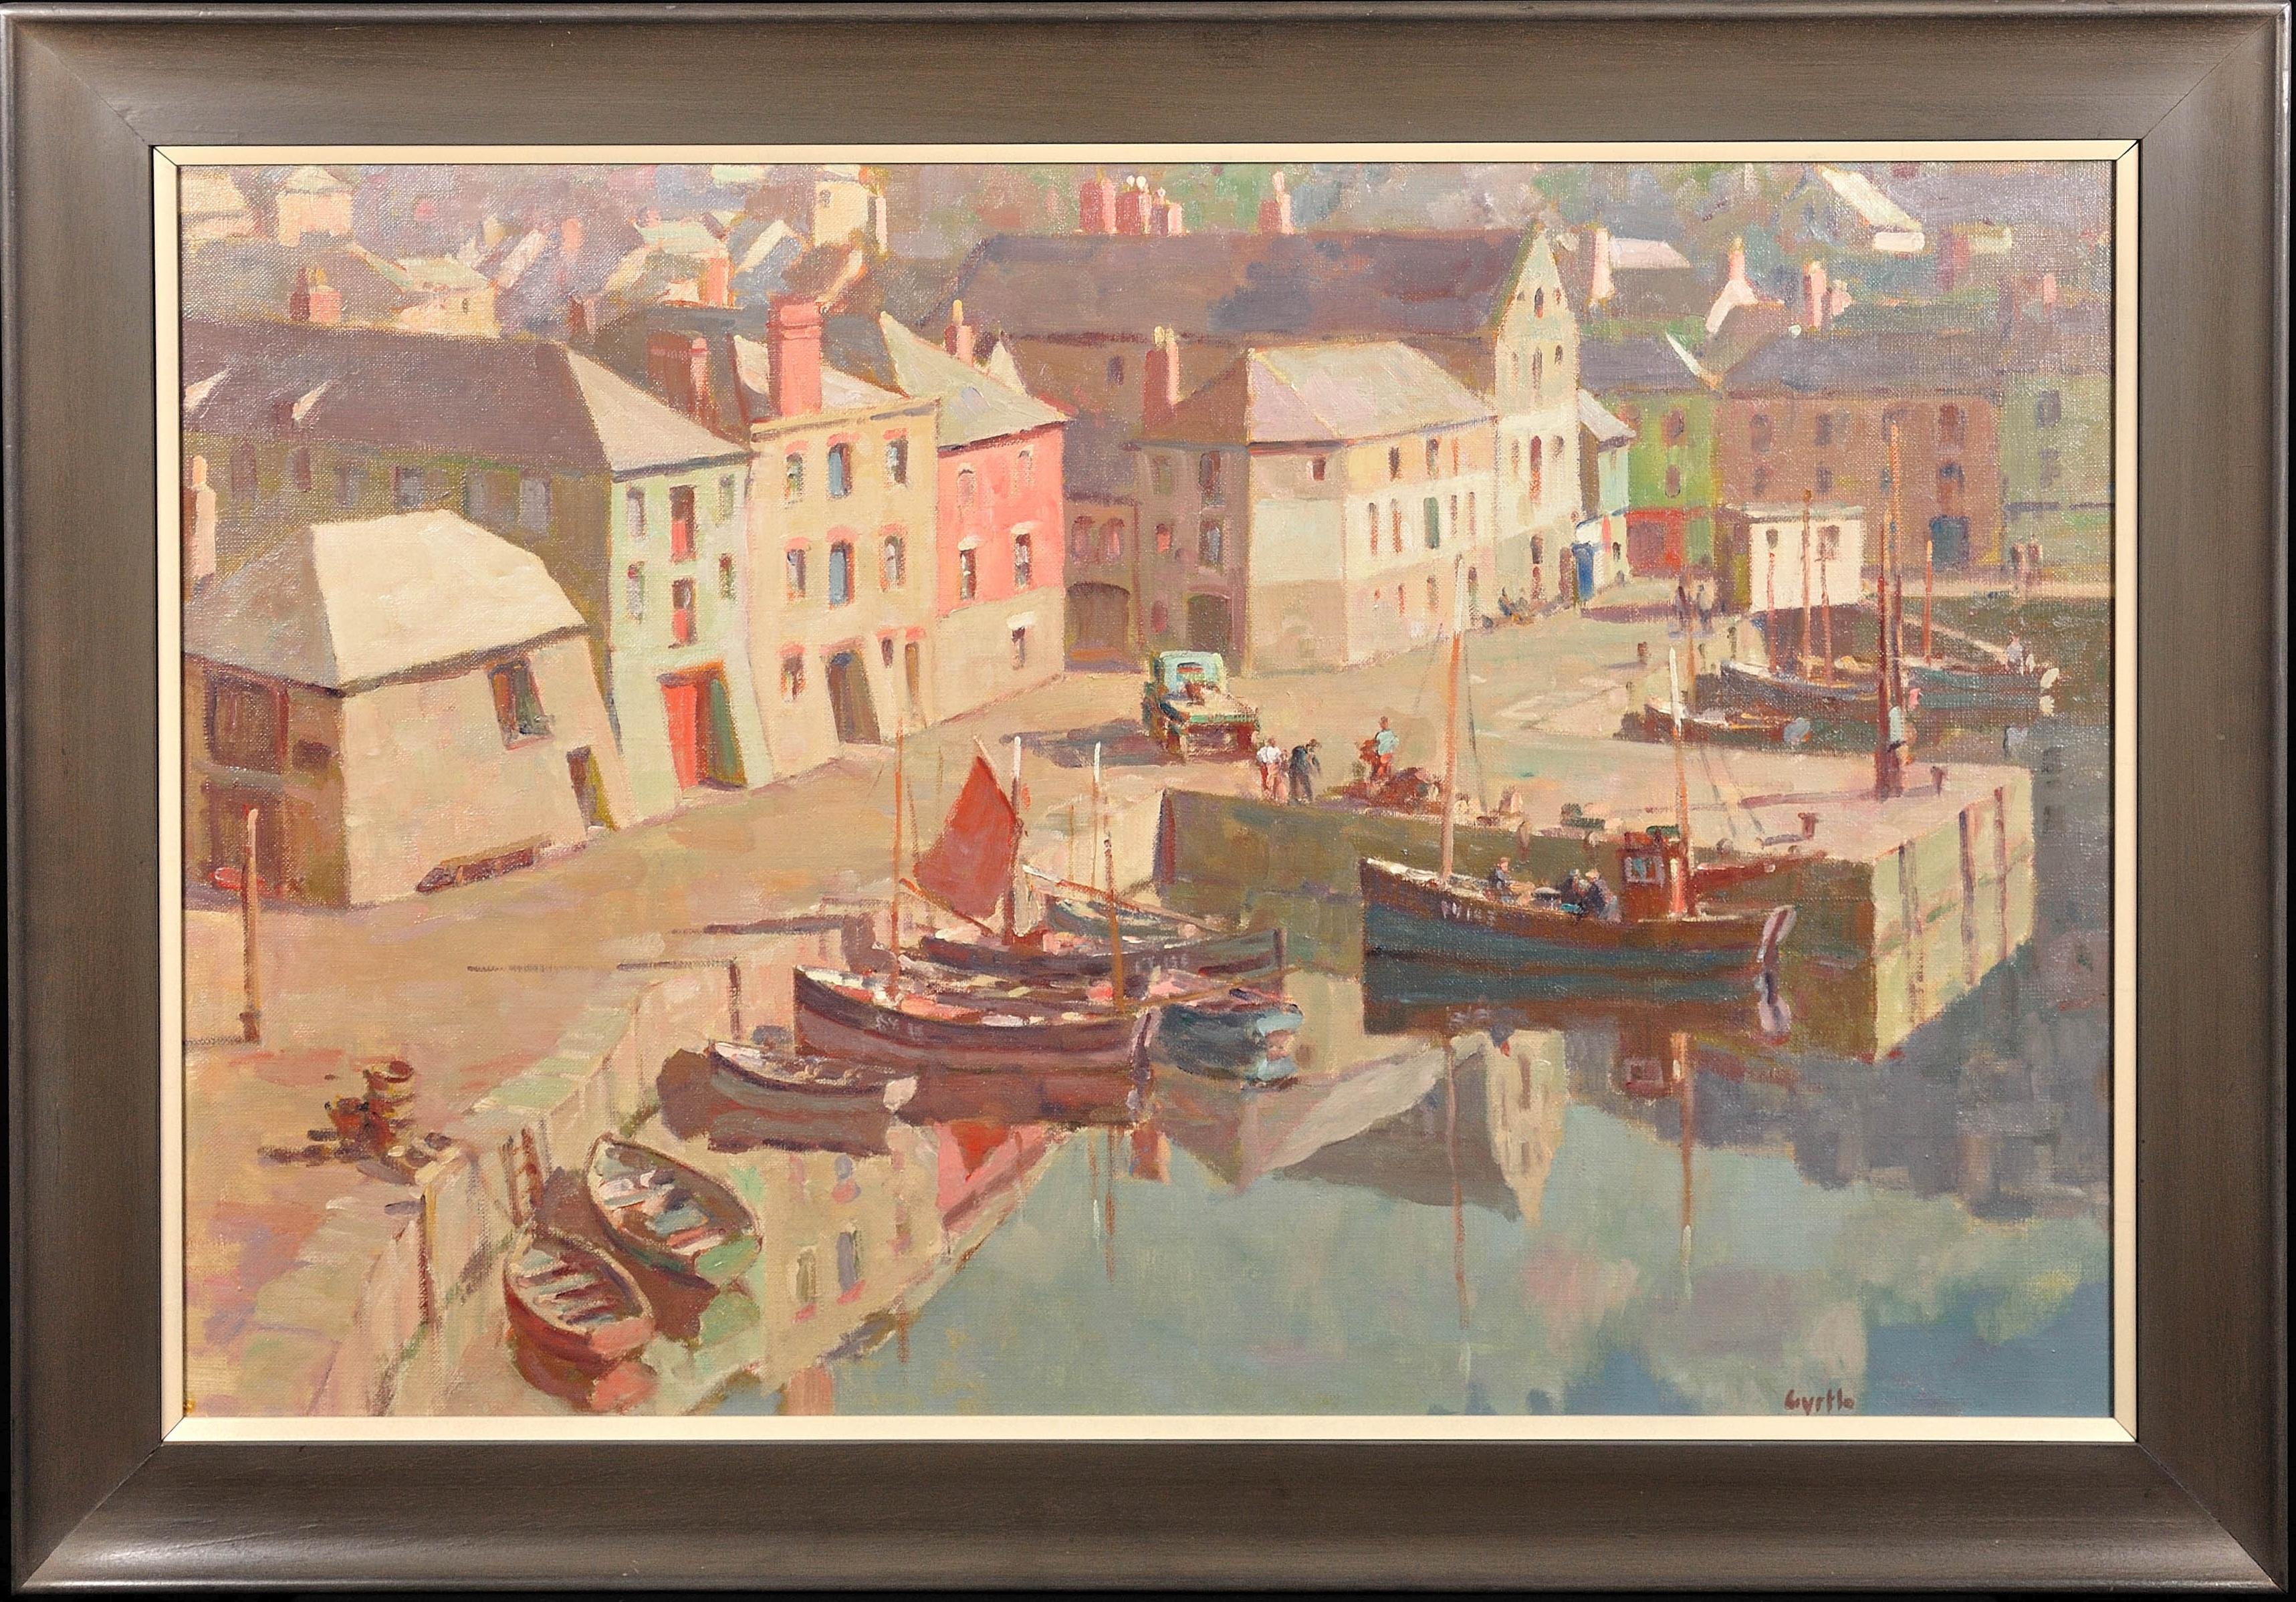 Gyrth Russell Landscape Painting - Before the Hot Day Brightens to Blue (Mevagissey Harbor, Cornwall). Original Oil